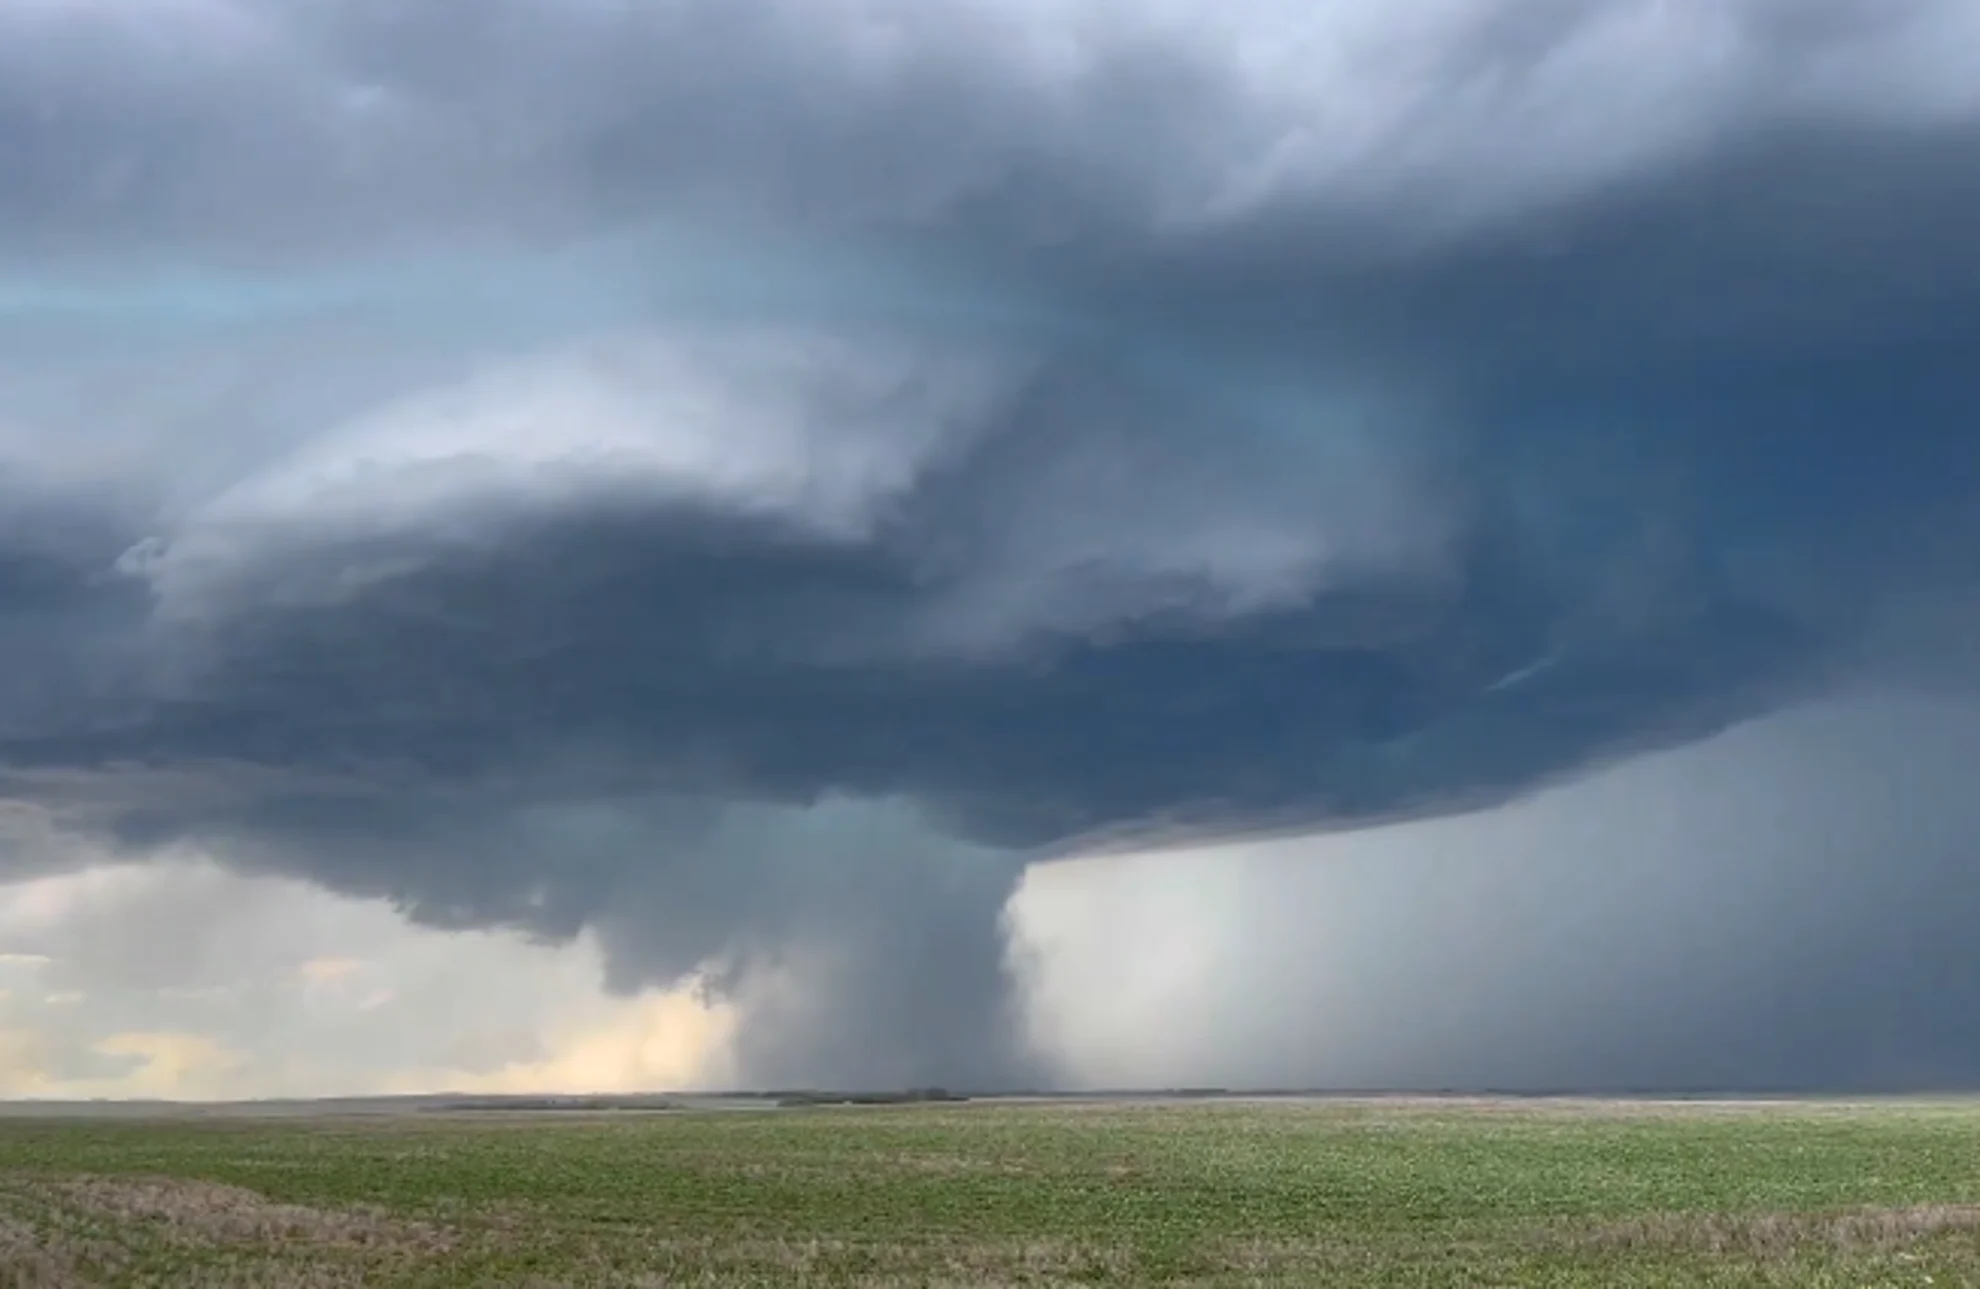 Sunday's severe weather outbreak prompted 6 concurrent tornado warnings over Saskatchewan. See what happened, here